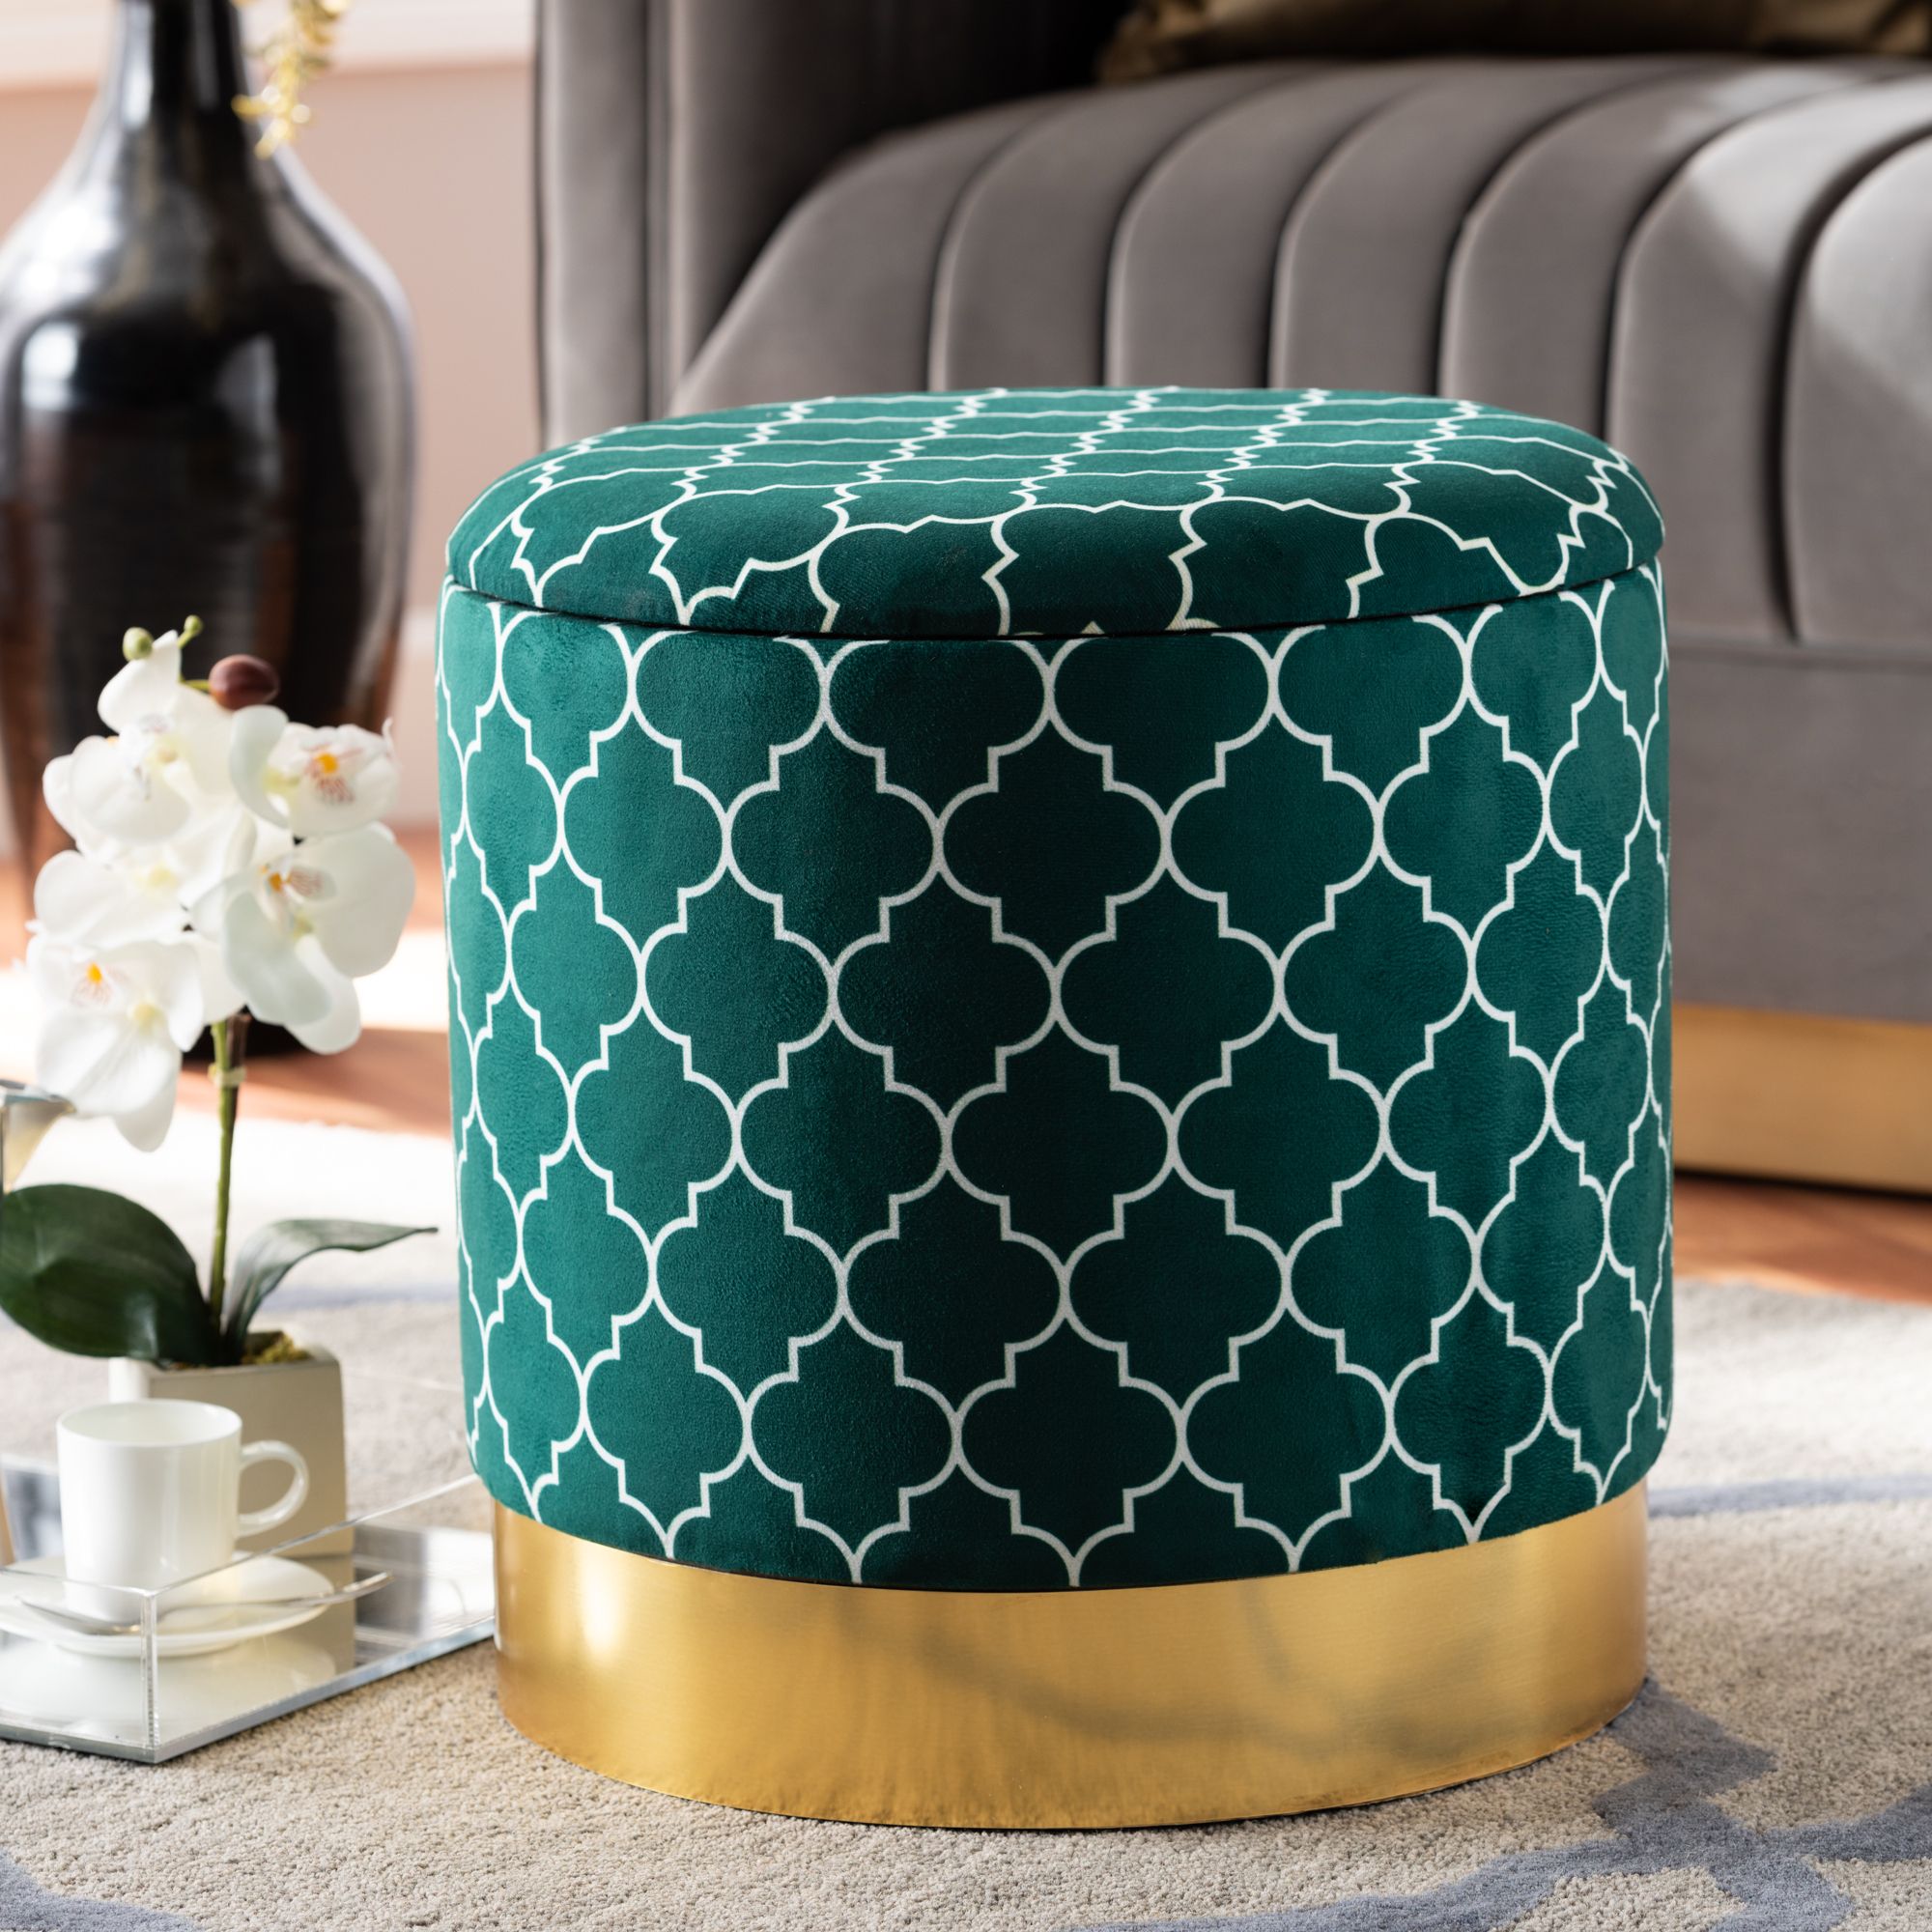 Best And Newest Green Fabric Square Storage Ottomans With Pillows Intended For Baxton Studio Serra Glam And Luxe Teal Green Quatrefoil Velvet Fabric (View 8 of 11)